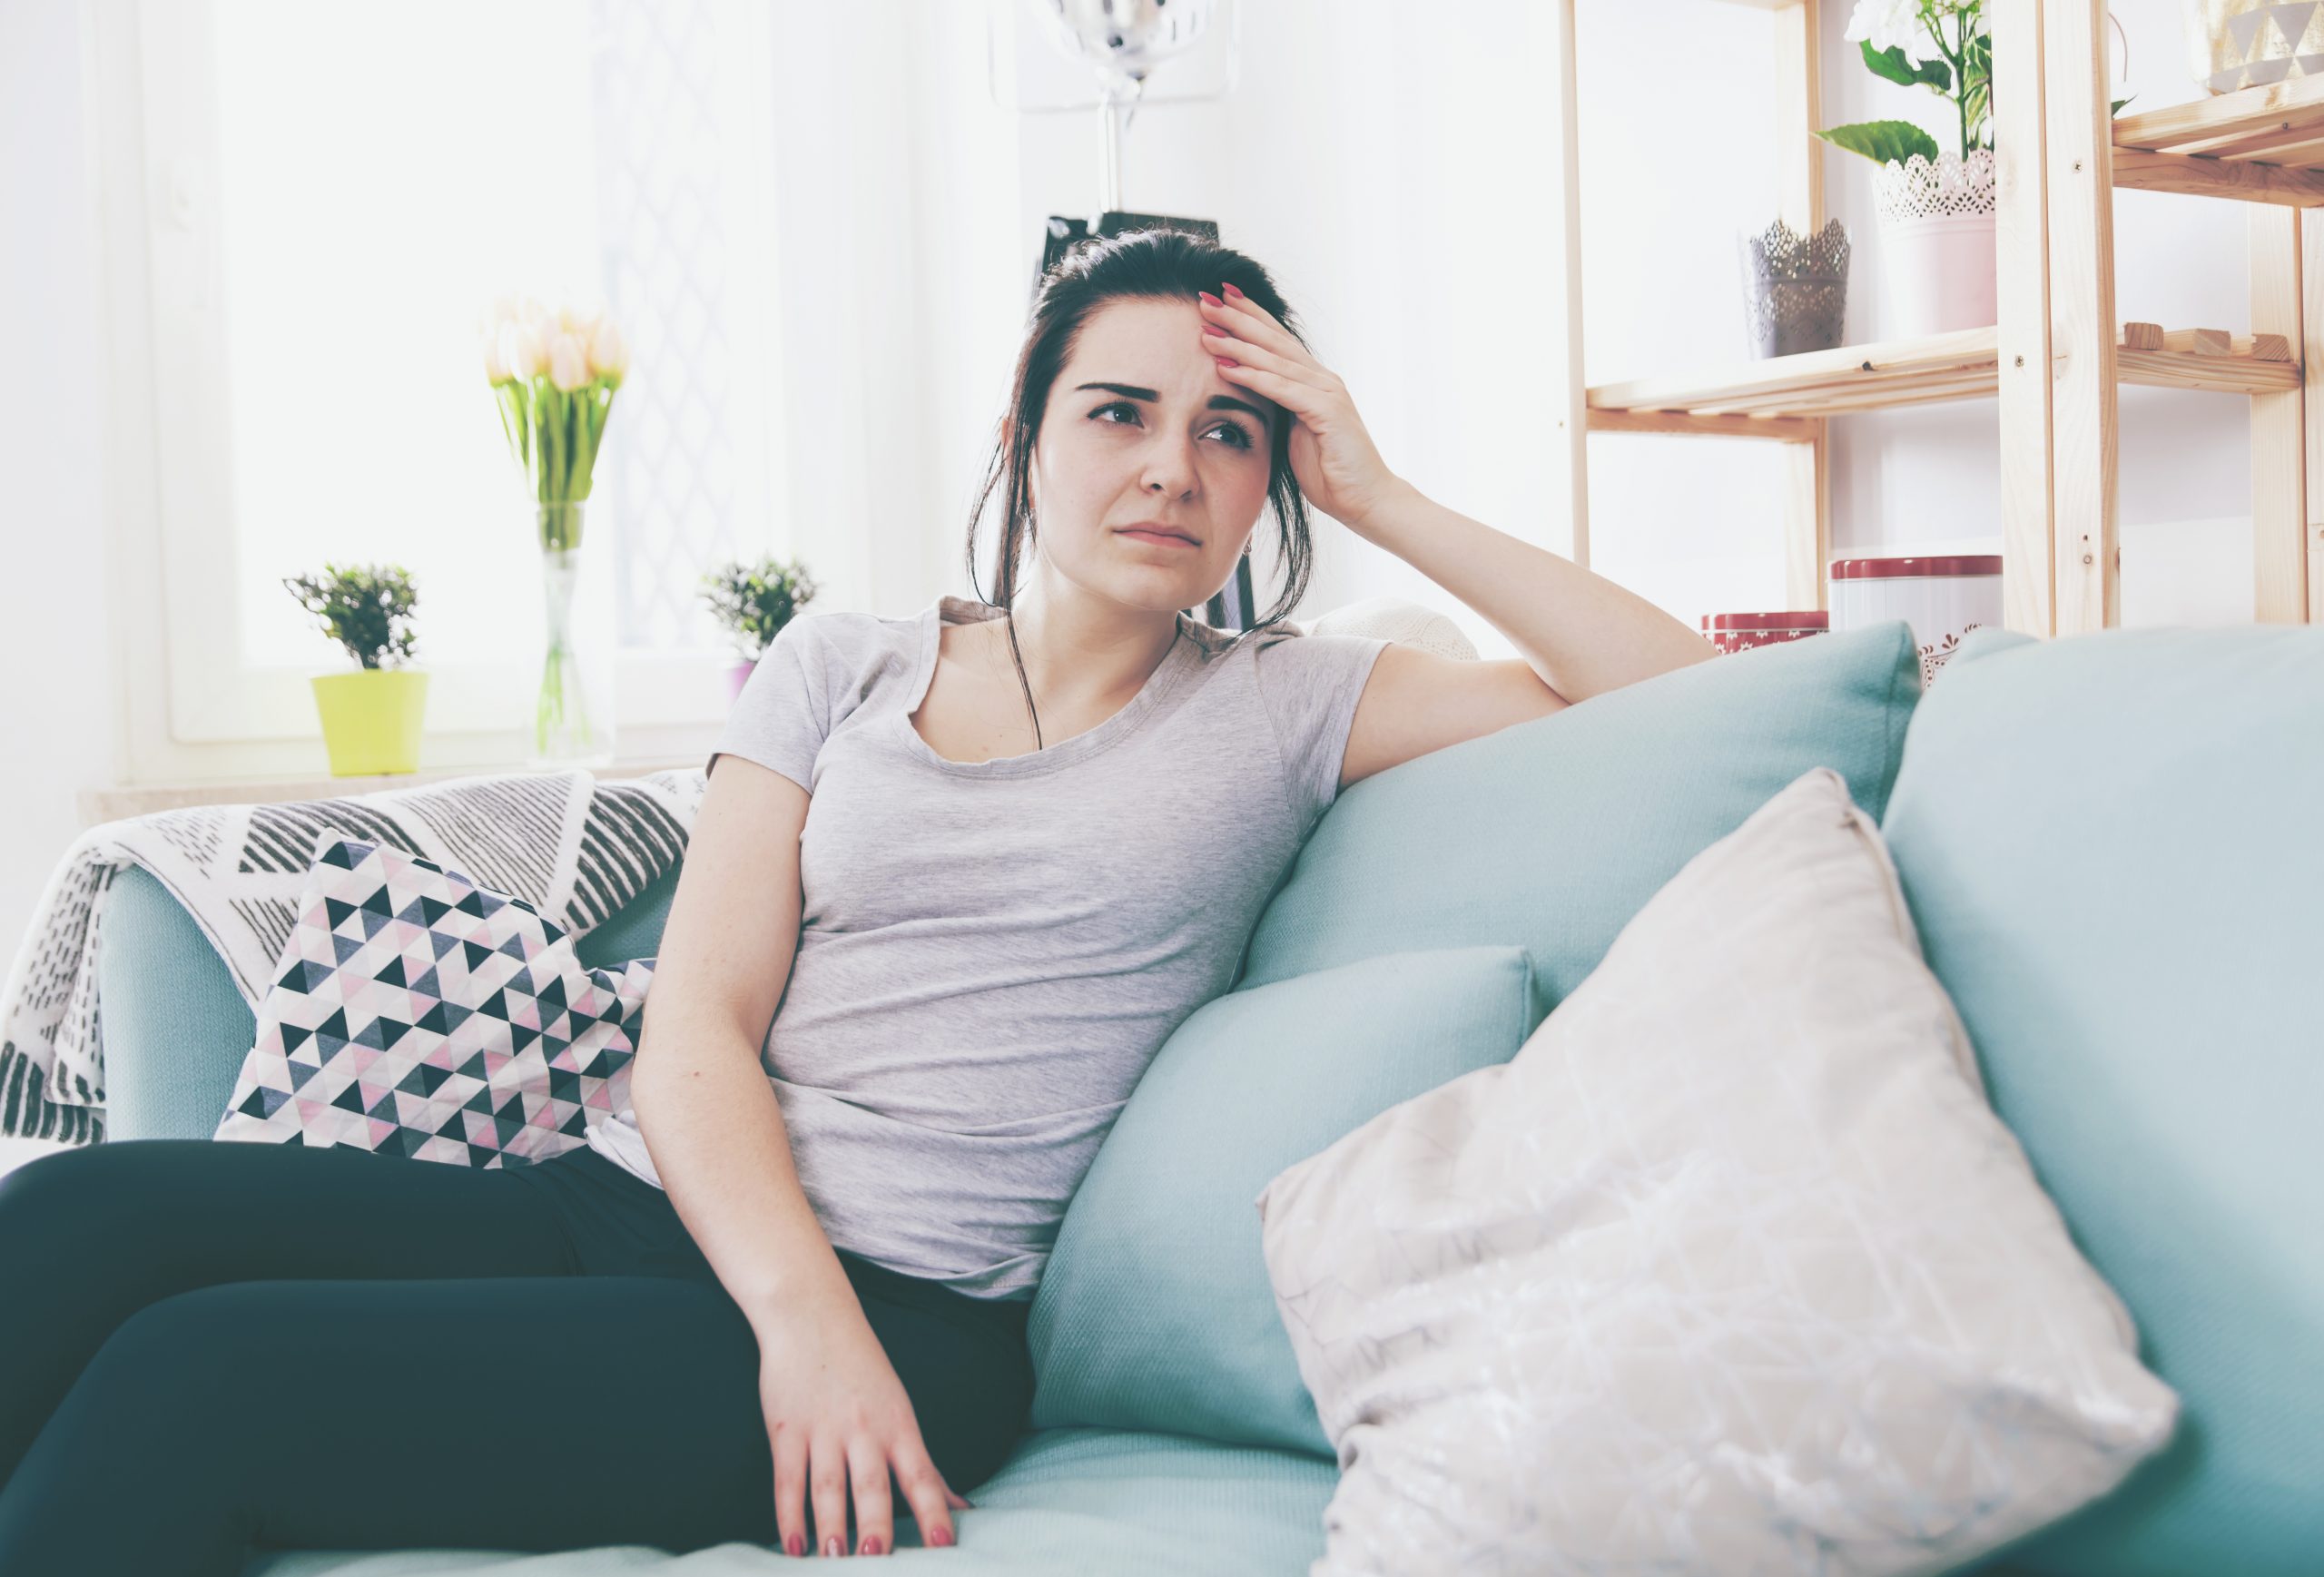 Young worried woman with headache while sitting on comfortable sofa, home interior